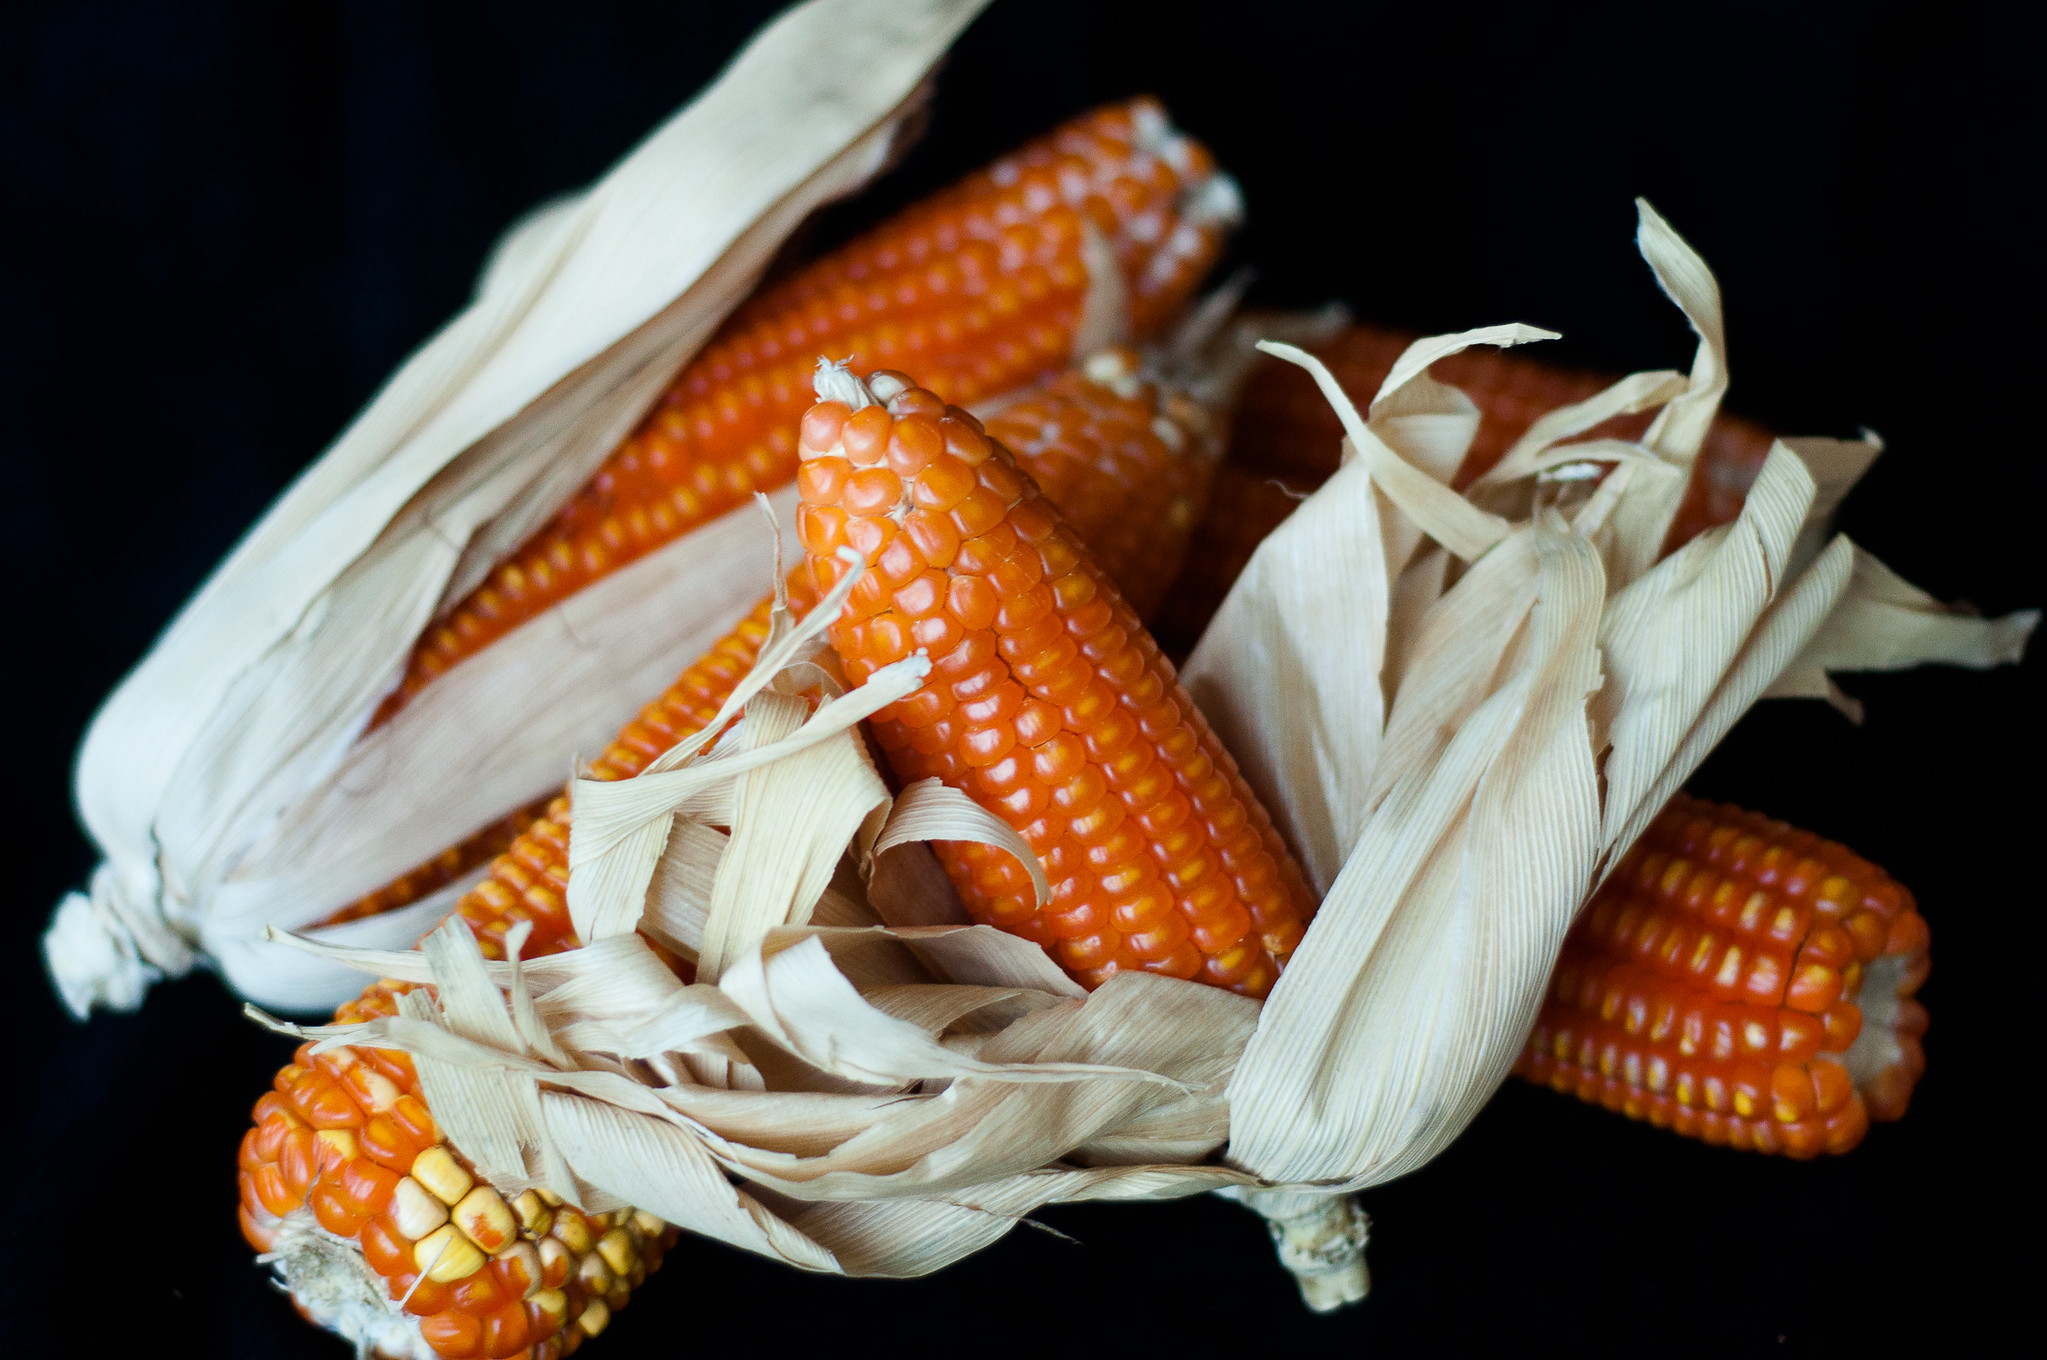 Unlike white maize varieties, vitamin A maize is rich in beta-carotene, giving it a distinctive orange color. This biofortified variety provides consumers with up to 40% of their daily vitamin A needs. (Photo: HarvestPlus/Joslin Isaacson)